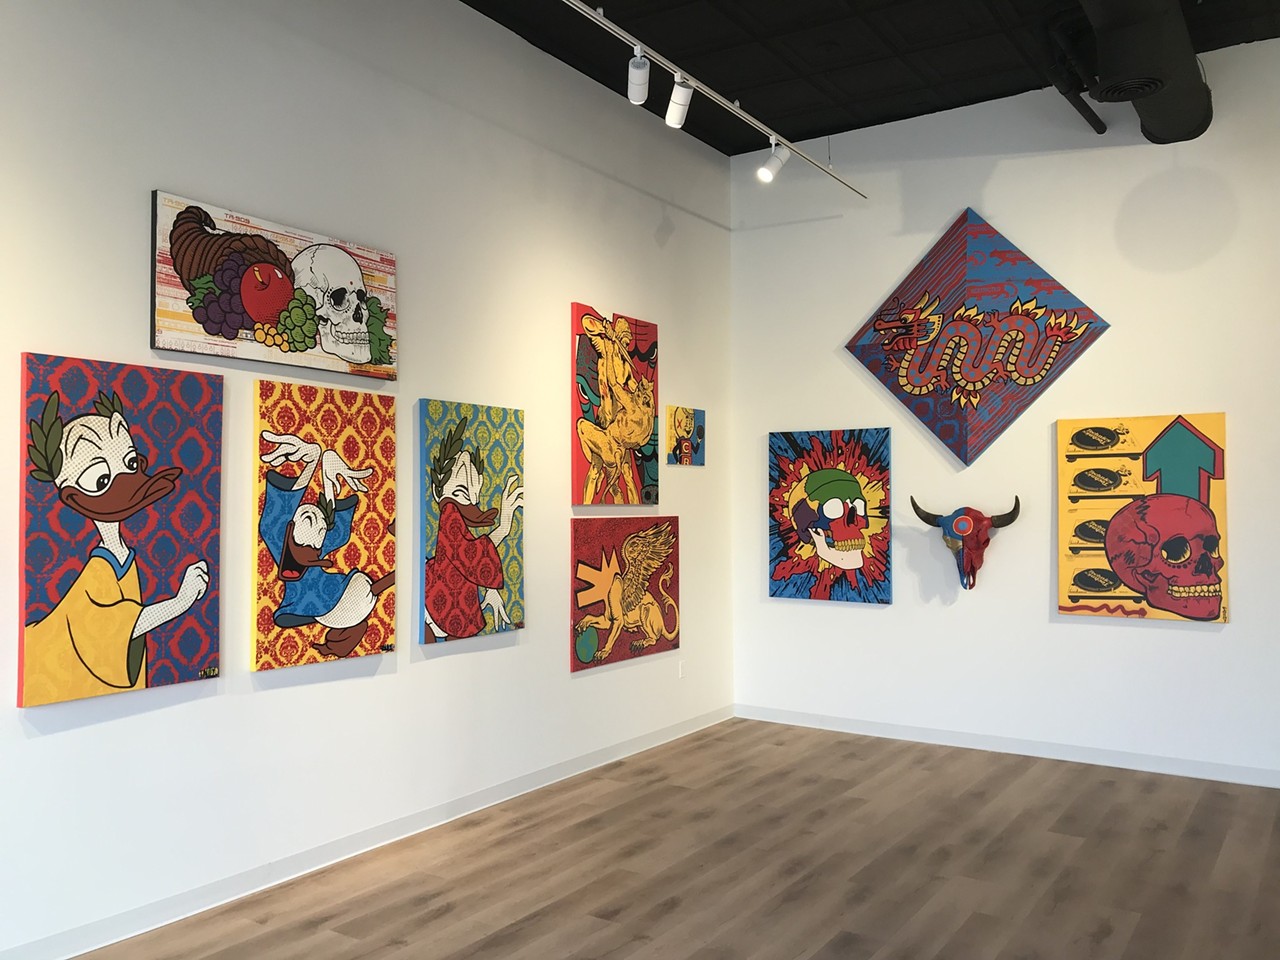 
Artist Pauly M. Everett in Conversation with Ted Hadfield
When: April 5 from 6-7 p.m.
Where: KickstART Gallery & Artisan Shop (Farmington)
What: An art talk
Who: Pauly M. Everett and gallery curator Ted Hadfield
Why: Hear the featured artist discuss art, life in Flint, and more.